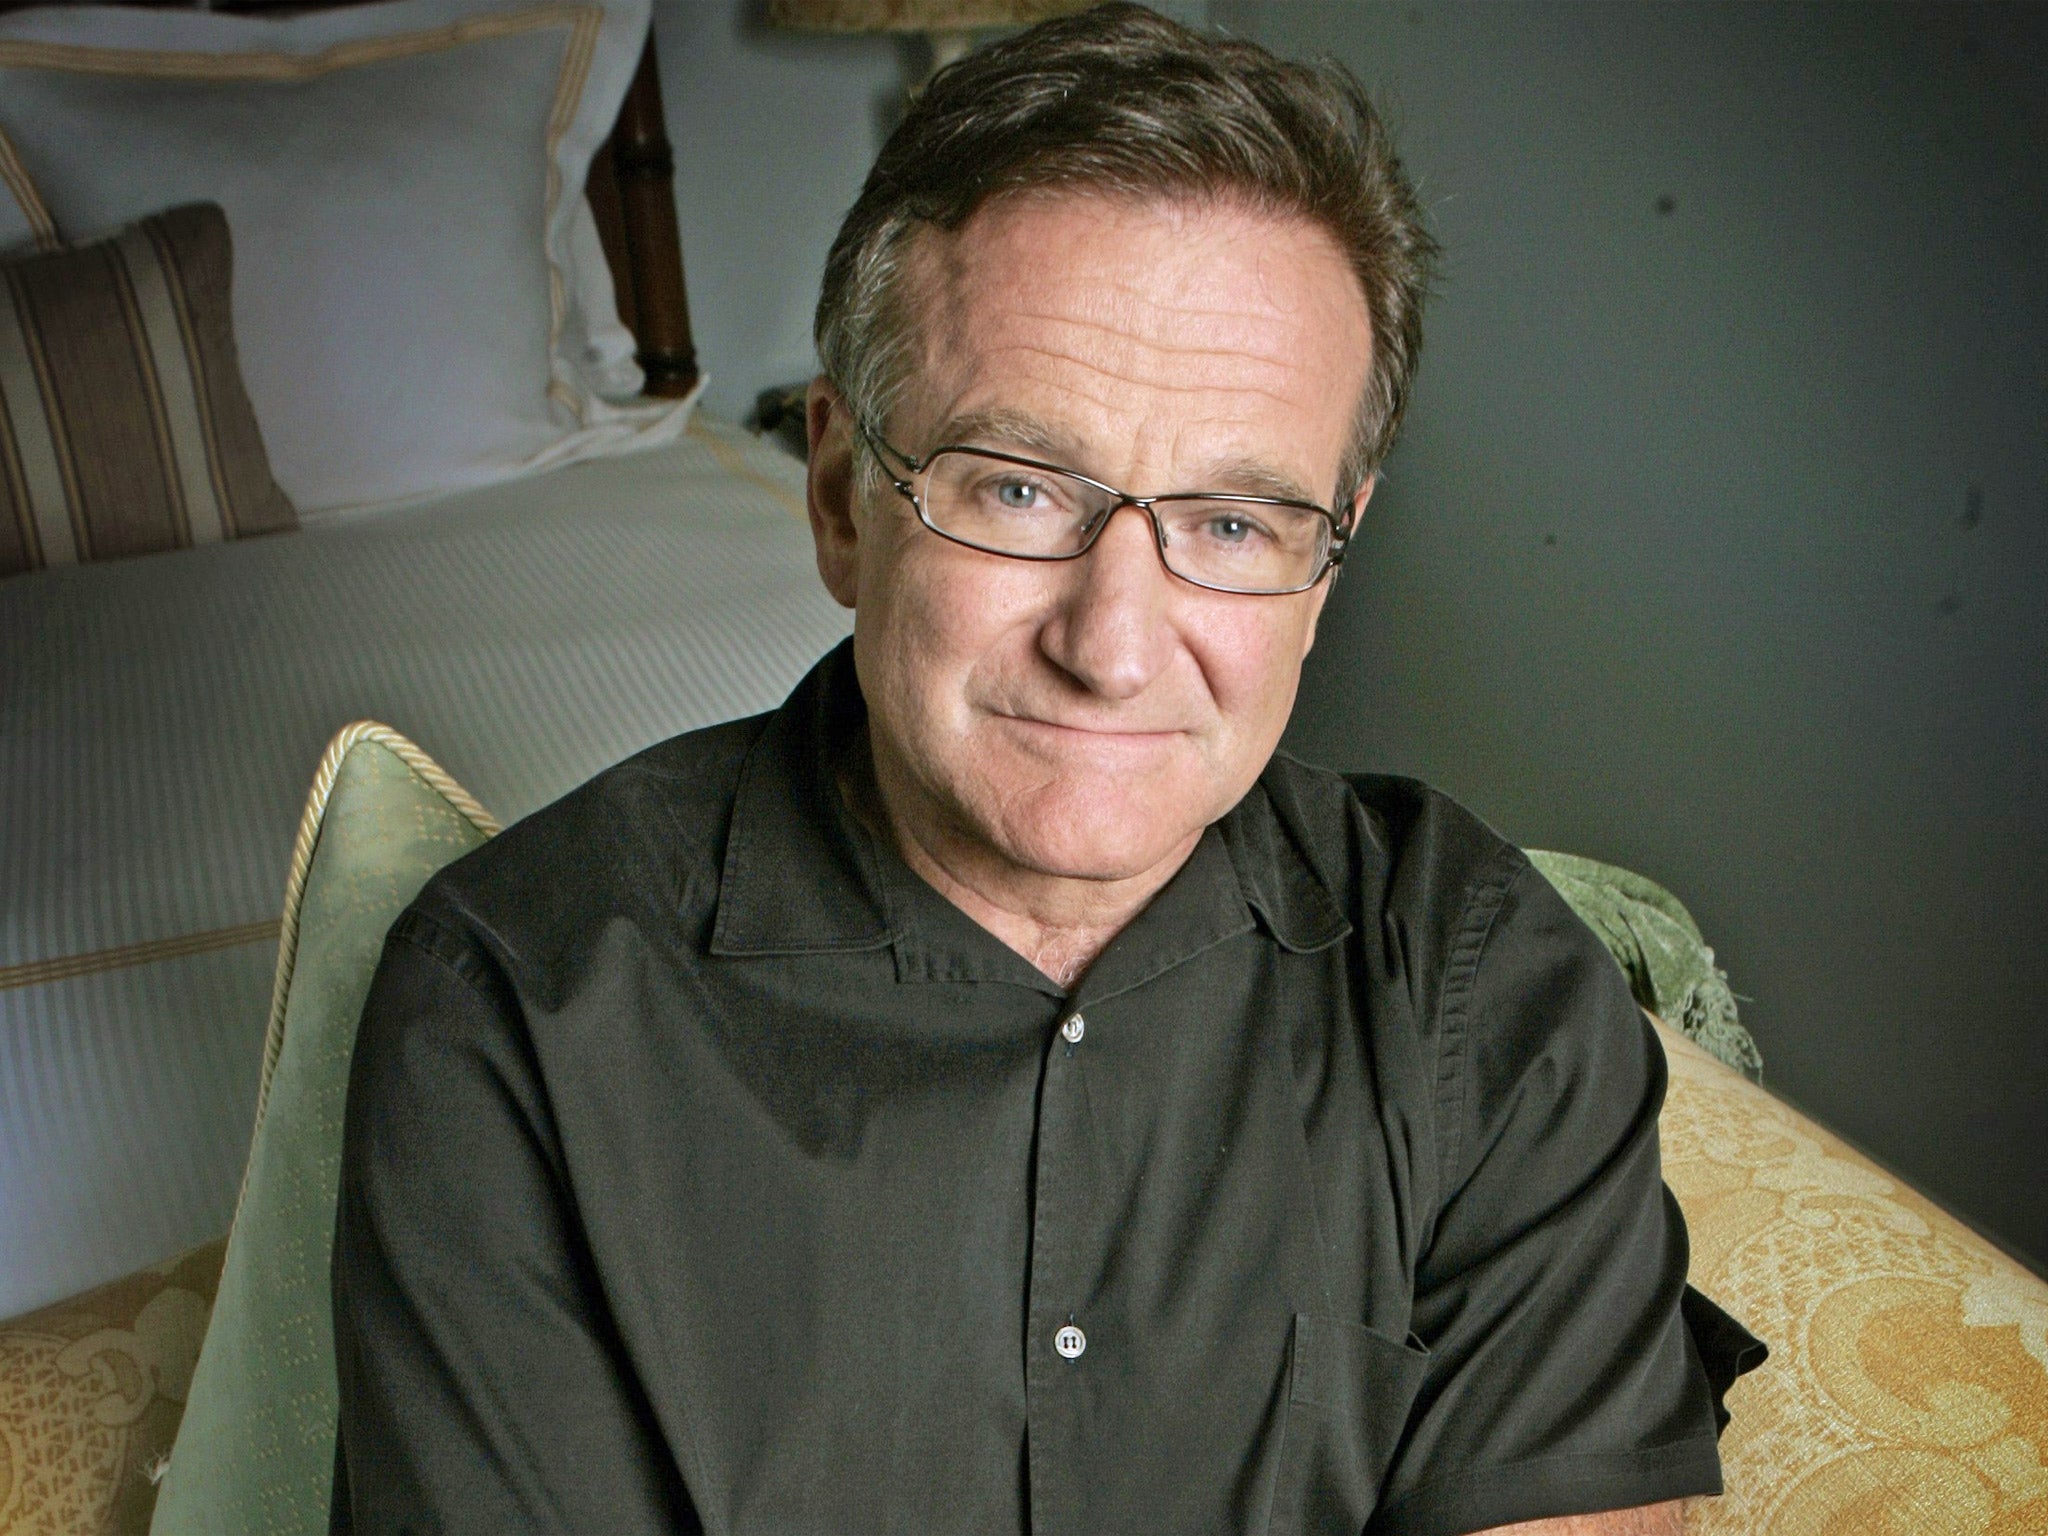 Robin Williams in California in 2007, to promote his film ‘License To Wed’